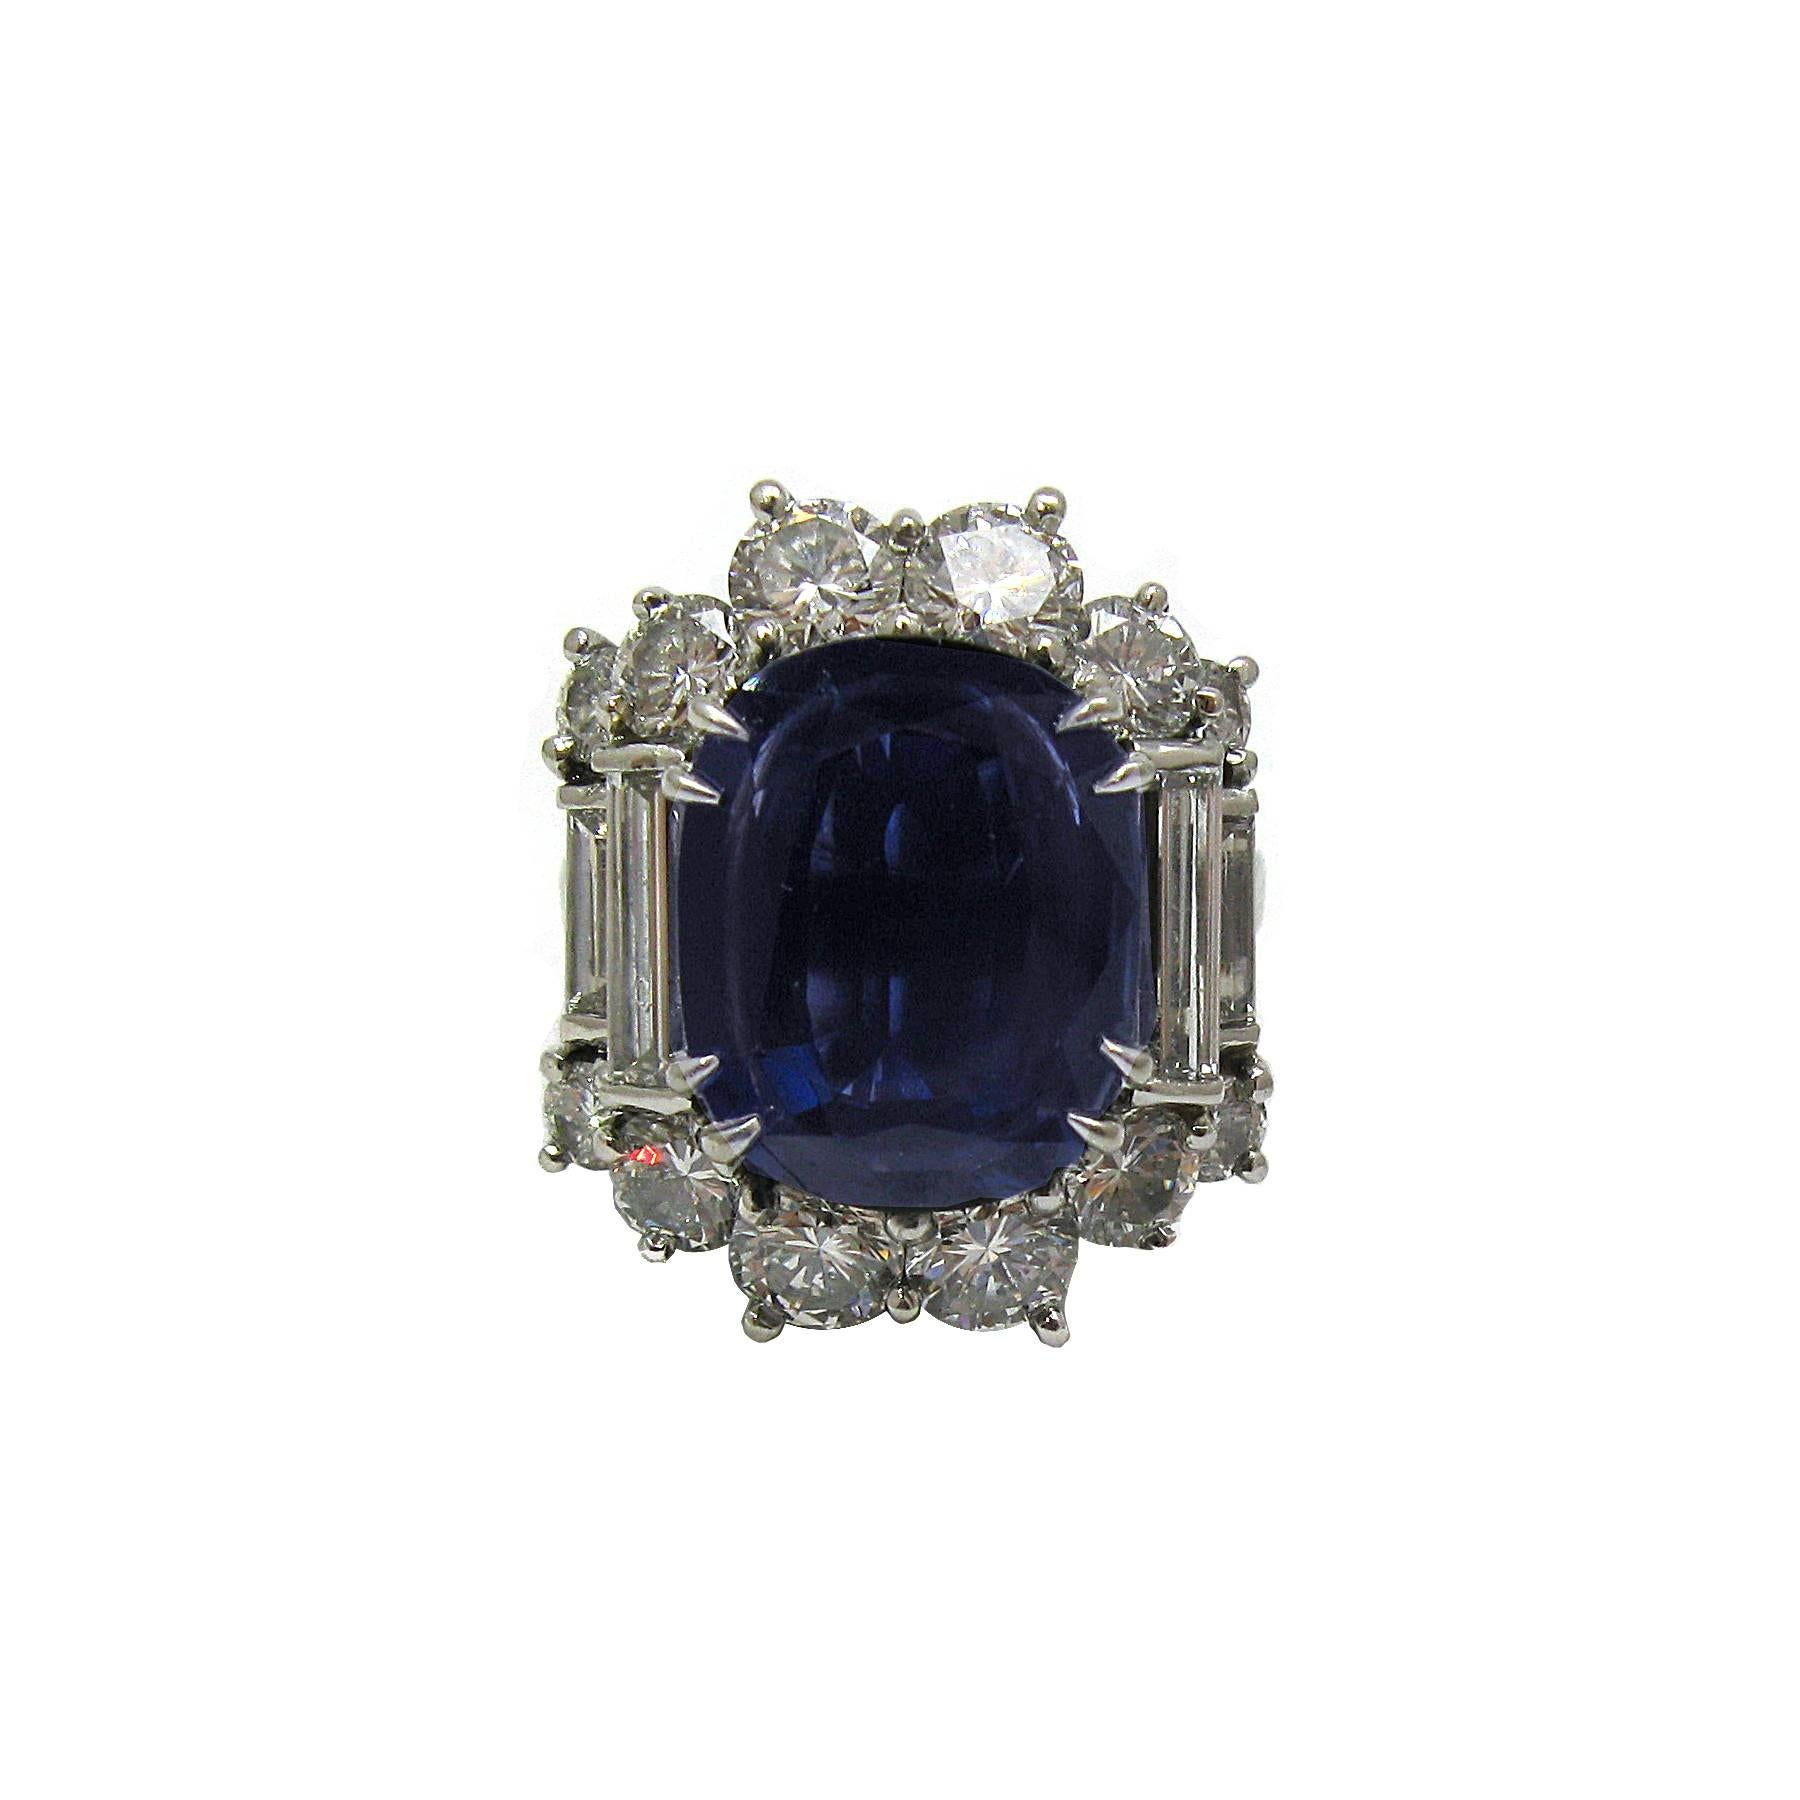 Contemporary 6.57 Carat GIA Certified Un-Heated Blue Sapphire and Diamond Ring in Platinum For Sale